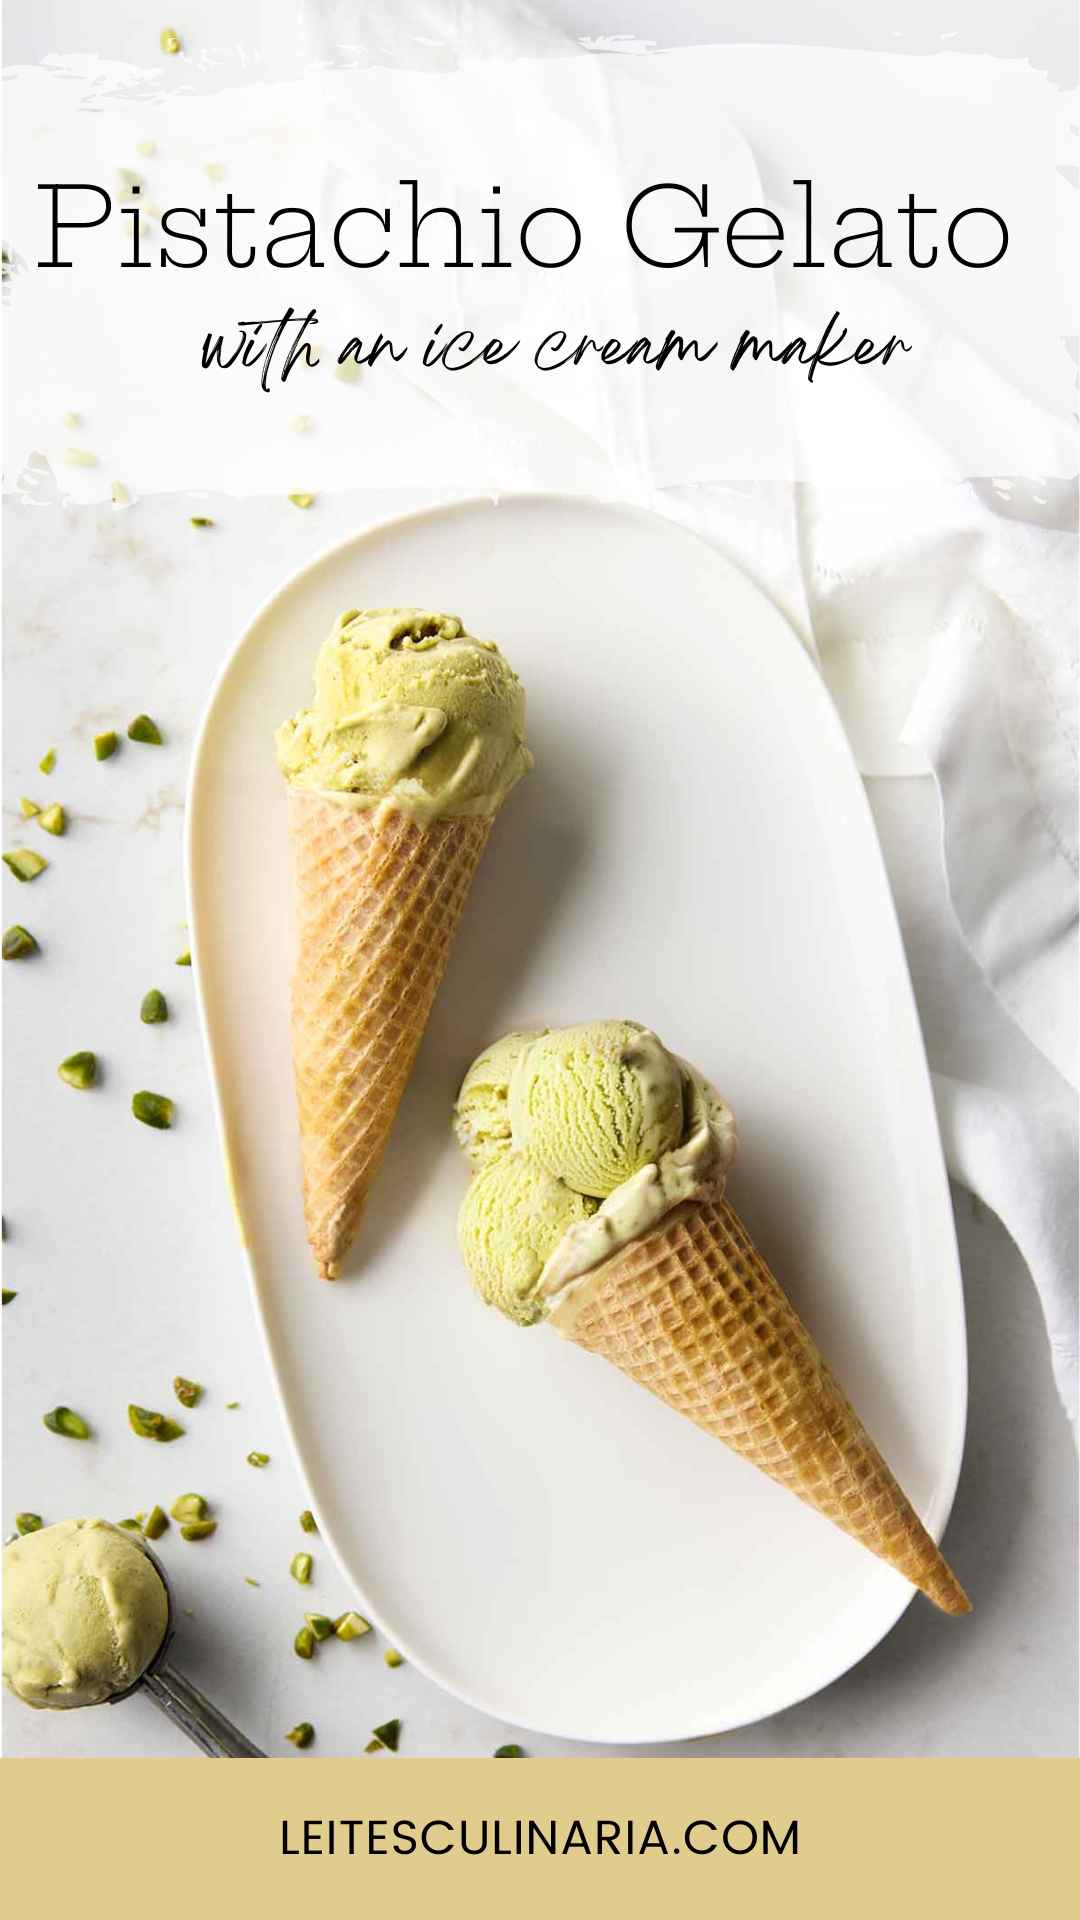 A platter with two ice cream cones filled with pistachio gelato.